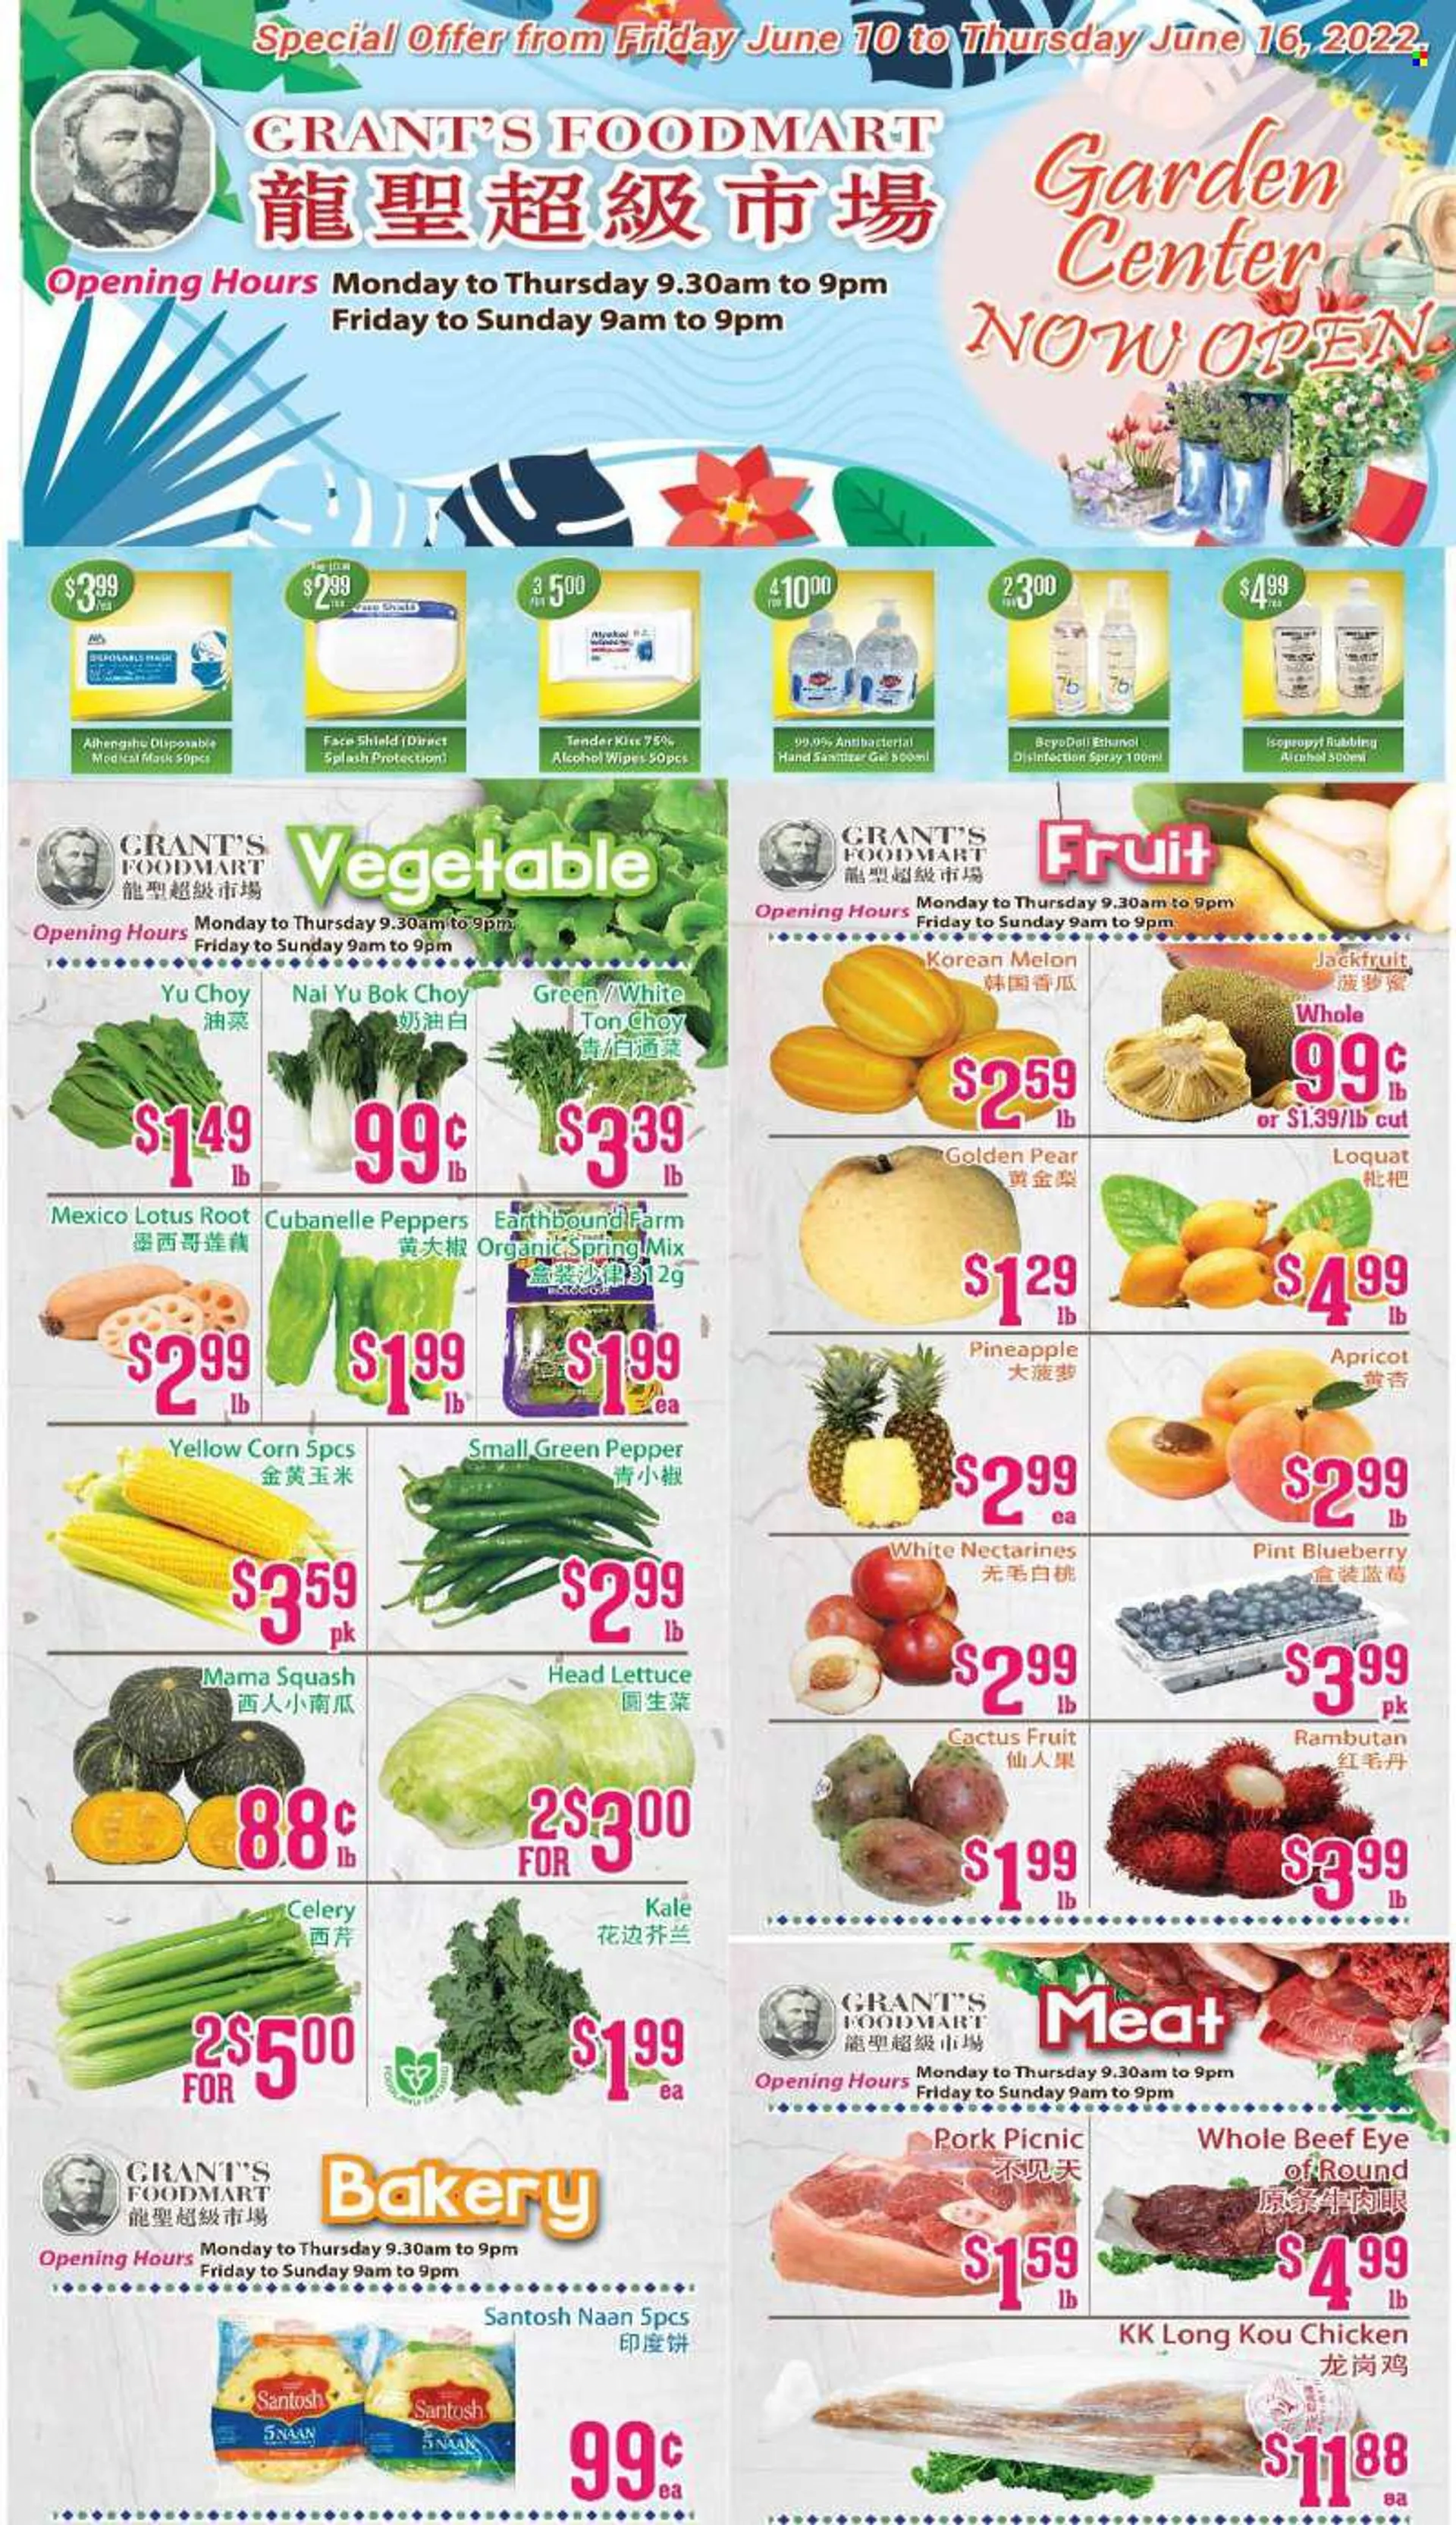 Grants Foodmart Flyer - June 10, 2022 - June 16, 2022 - Sales products - bok choy, celery, corn, peppers, green pepper, nectarines, pineapple, pears, melons, Grants, beef meat, eye of round, wipes, Lotus, hand sanitizer, disposable mask. Page 1.